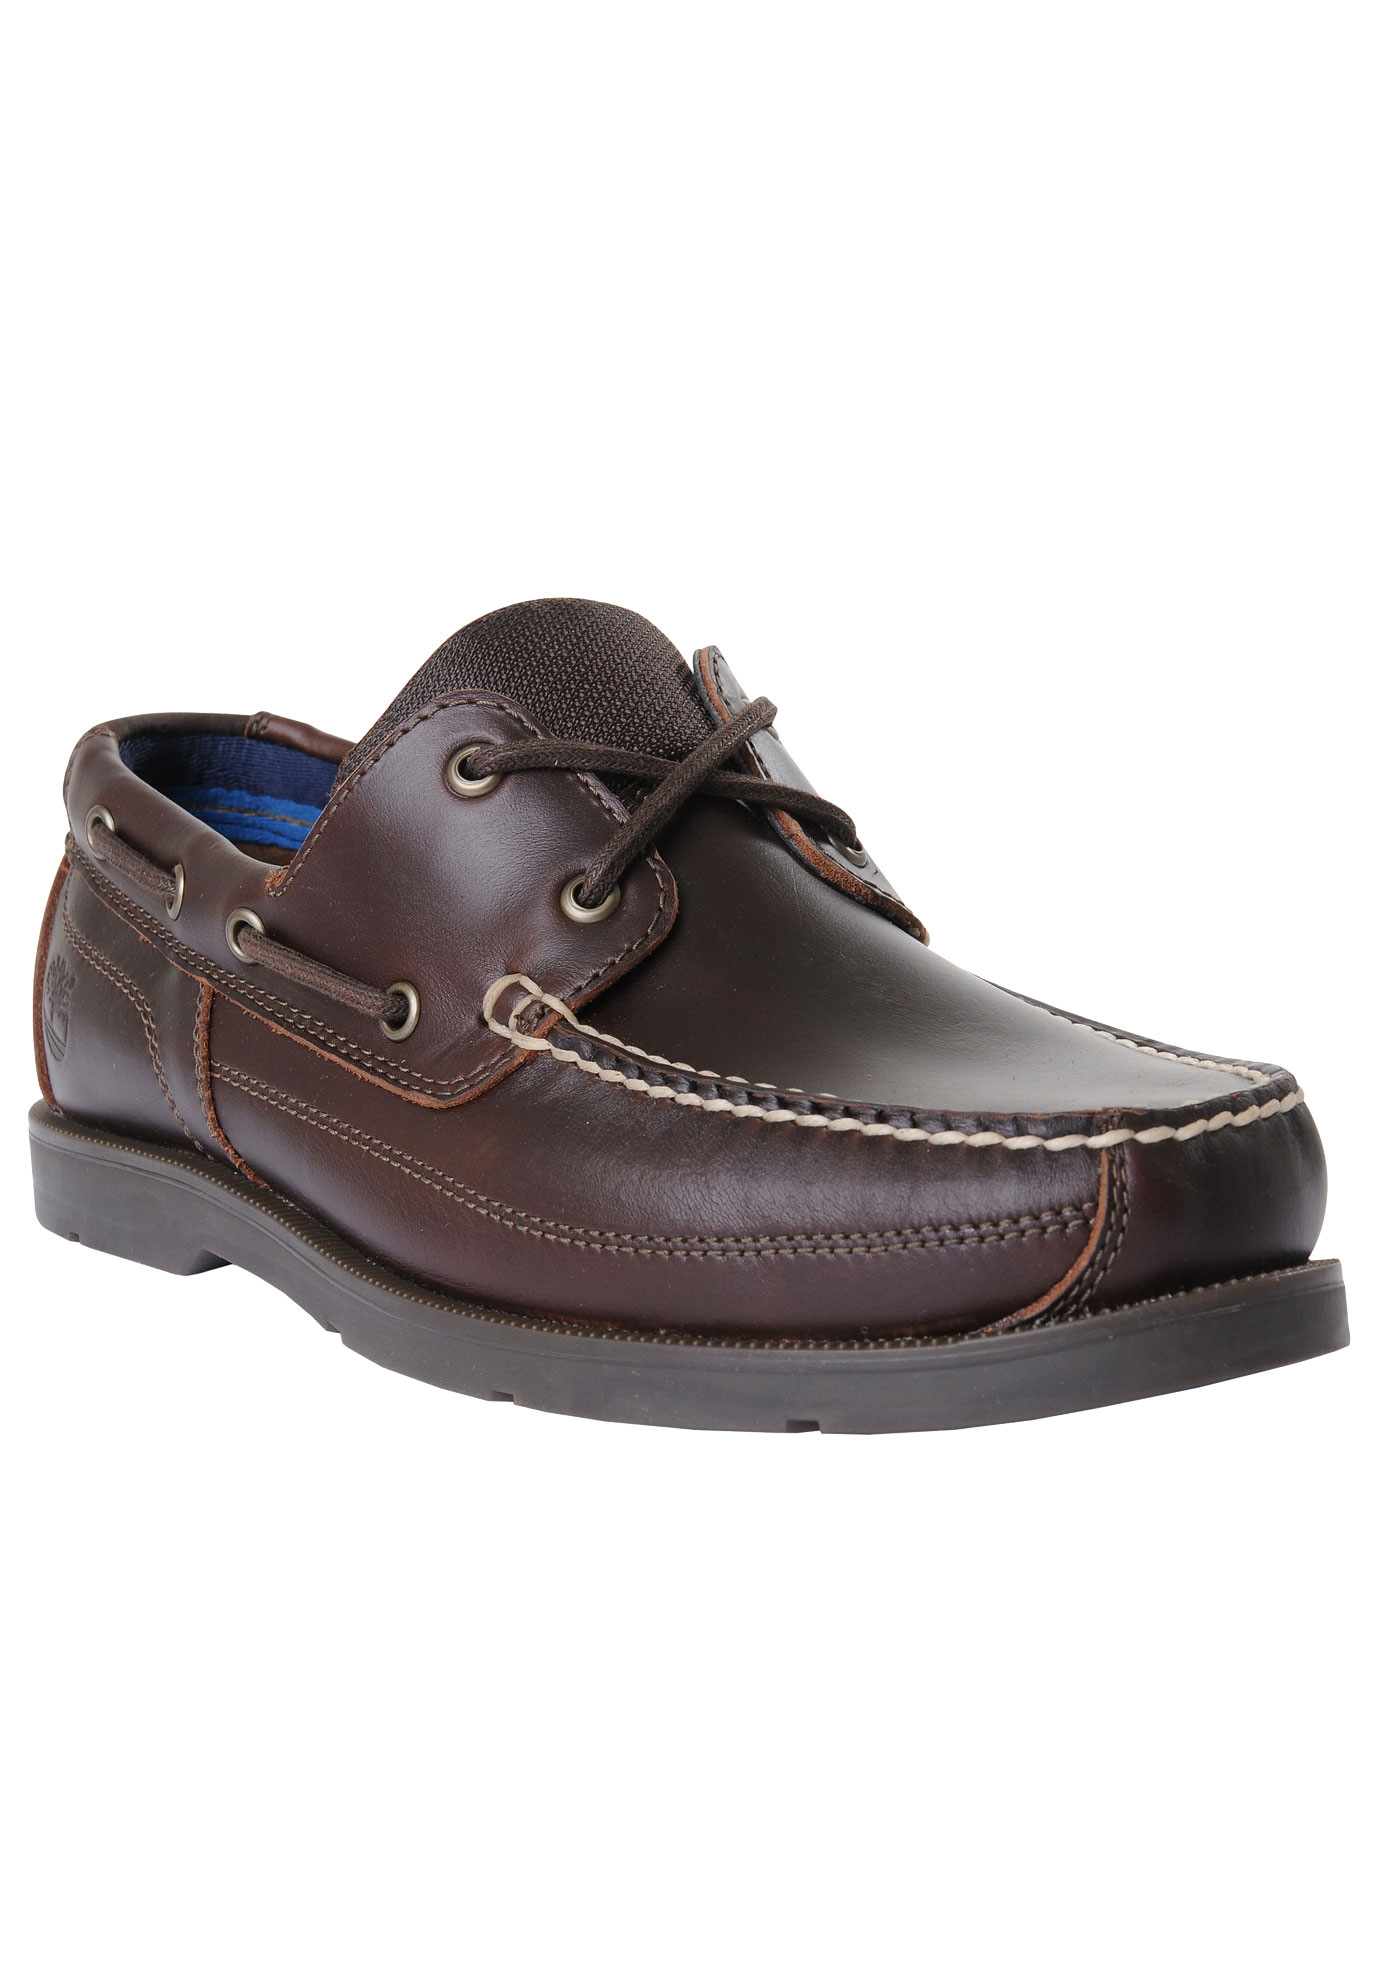 Timberland® Piper Cove Boat Shoe| Big and Tall Shoes | Full Beauty